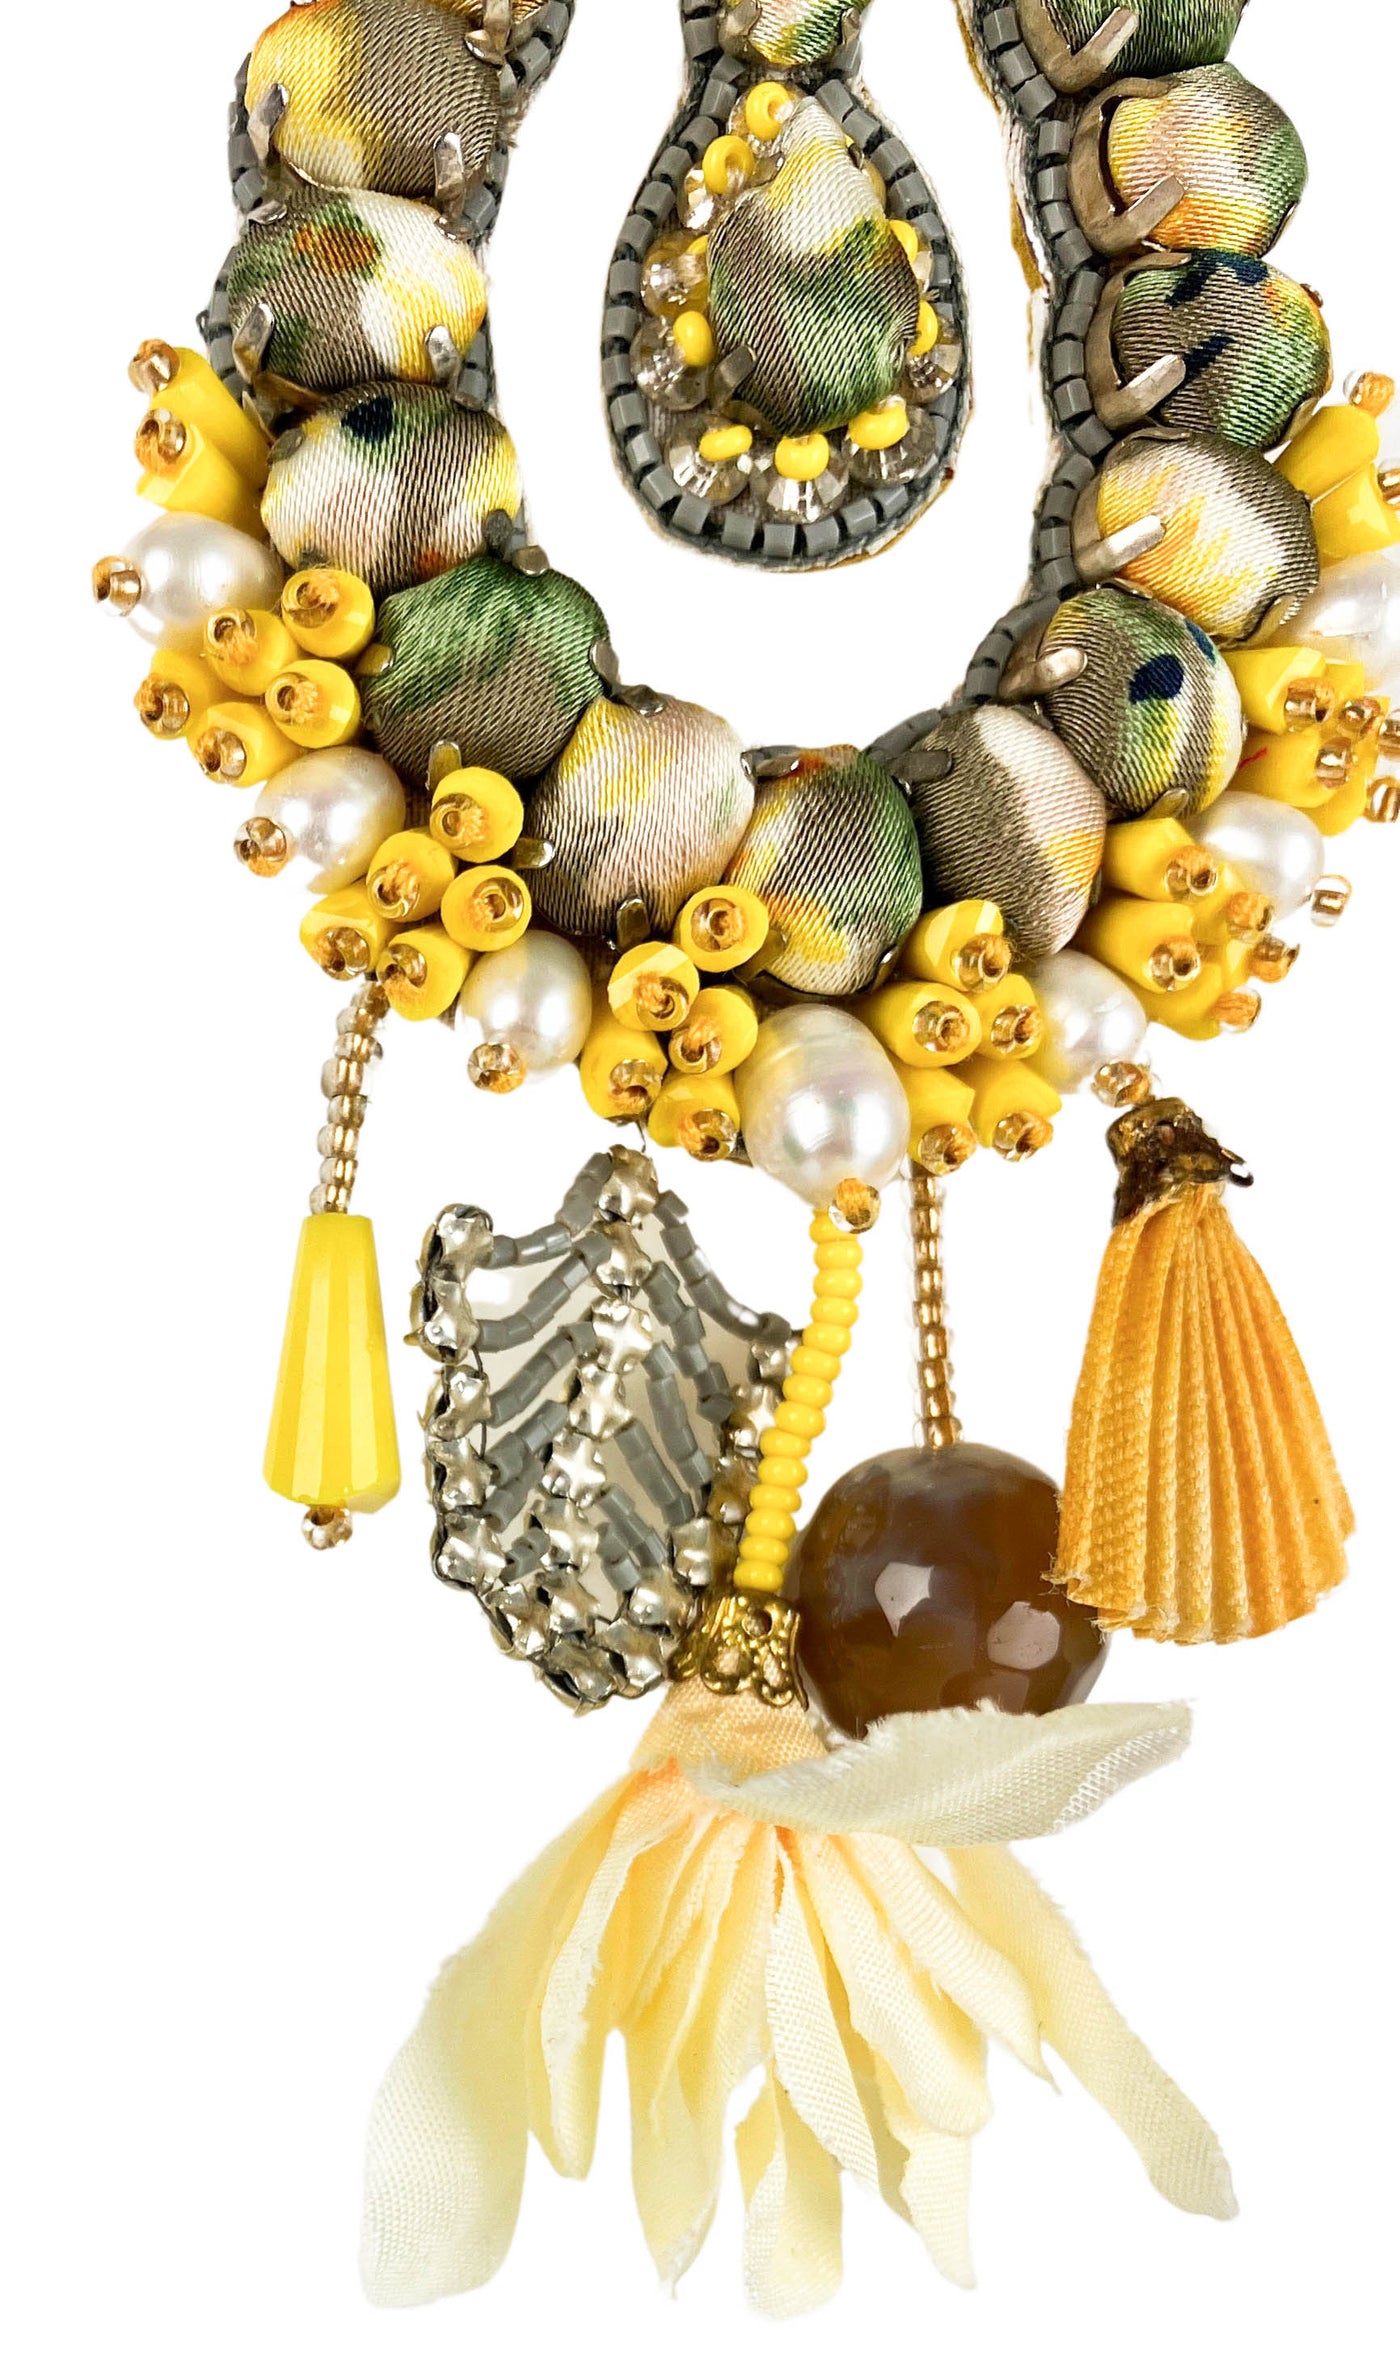 Exclusive Designer Robin Earrings in Yellow/Green - Discounts on Exclusive Designer at UAL